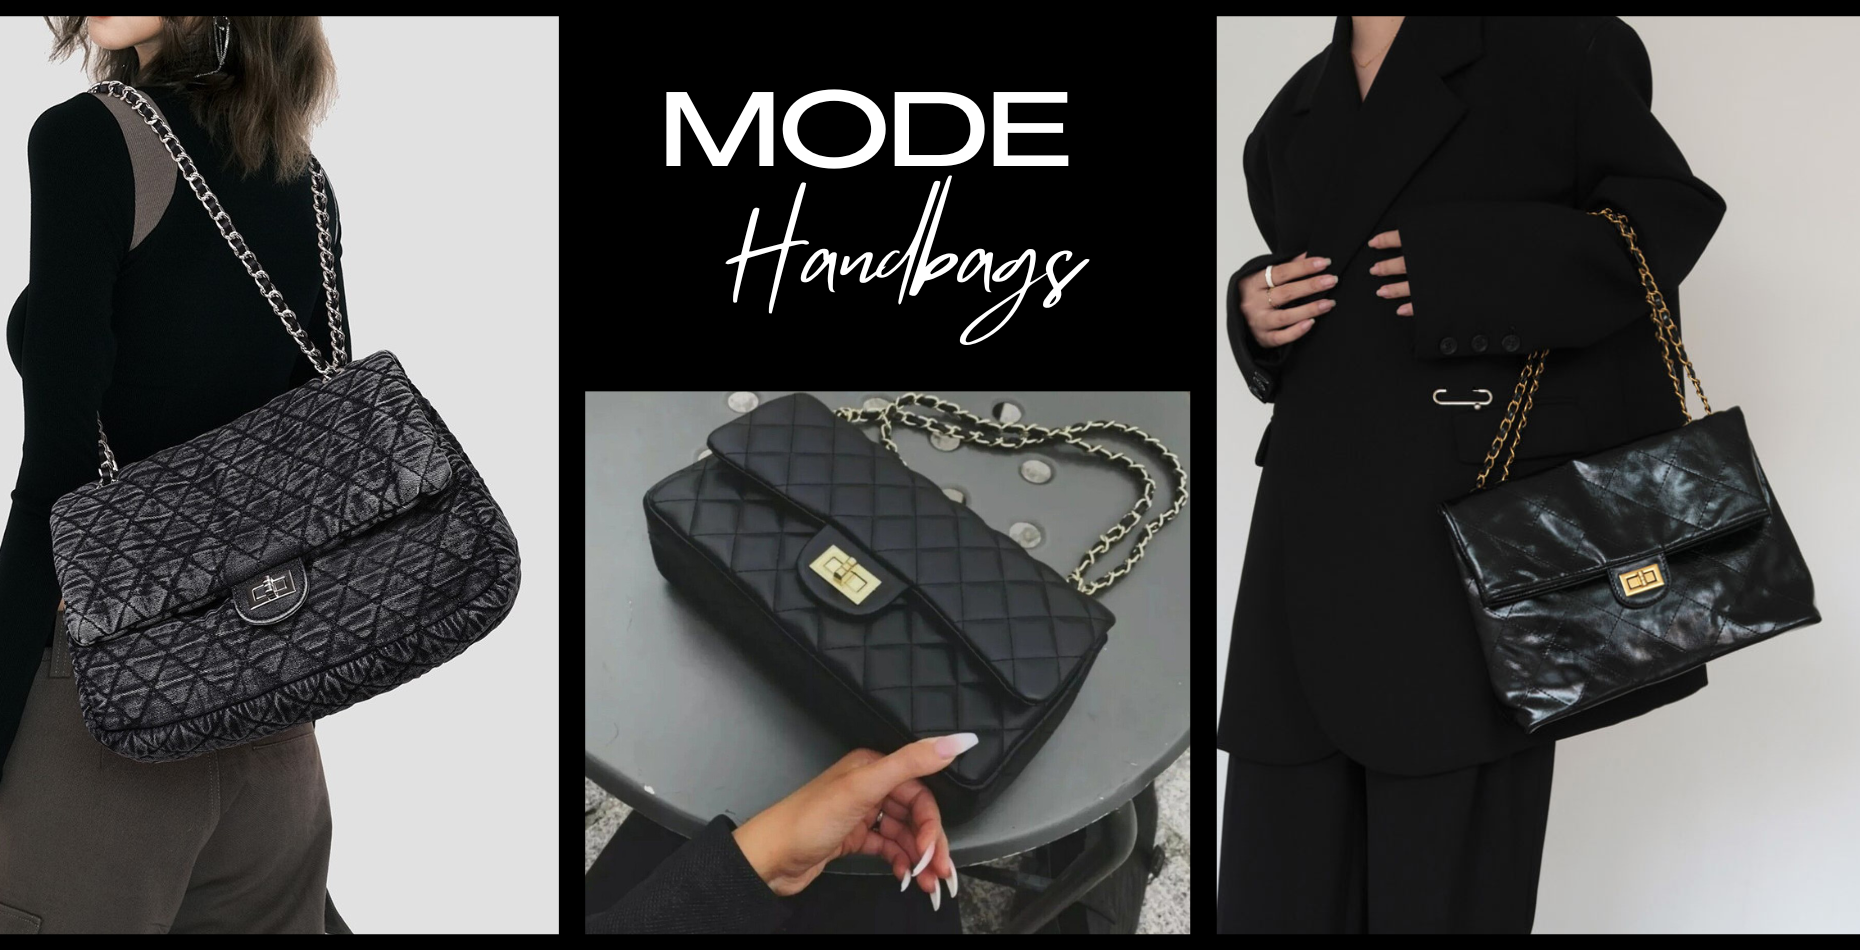 Discover Wide Selection of Designer Inspired Handbags, Buy One Get Two Free!